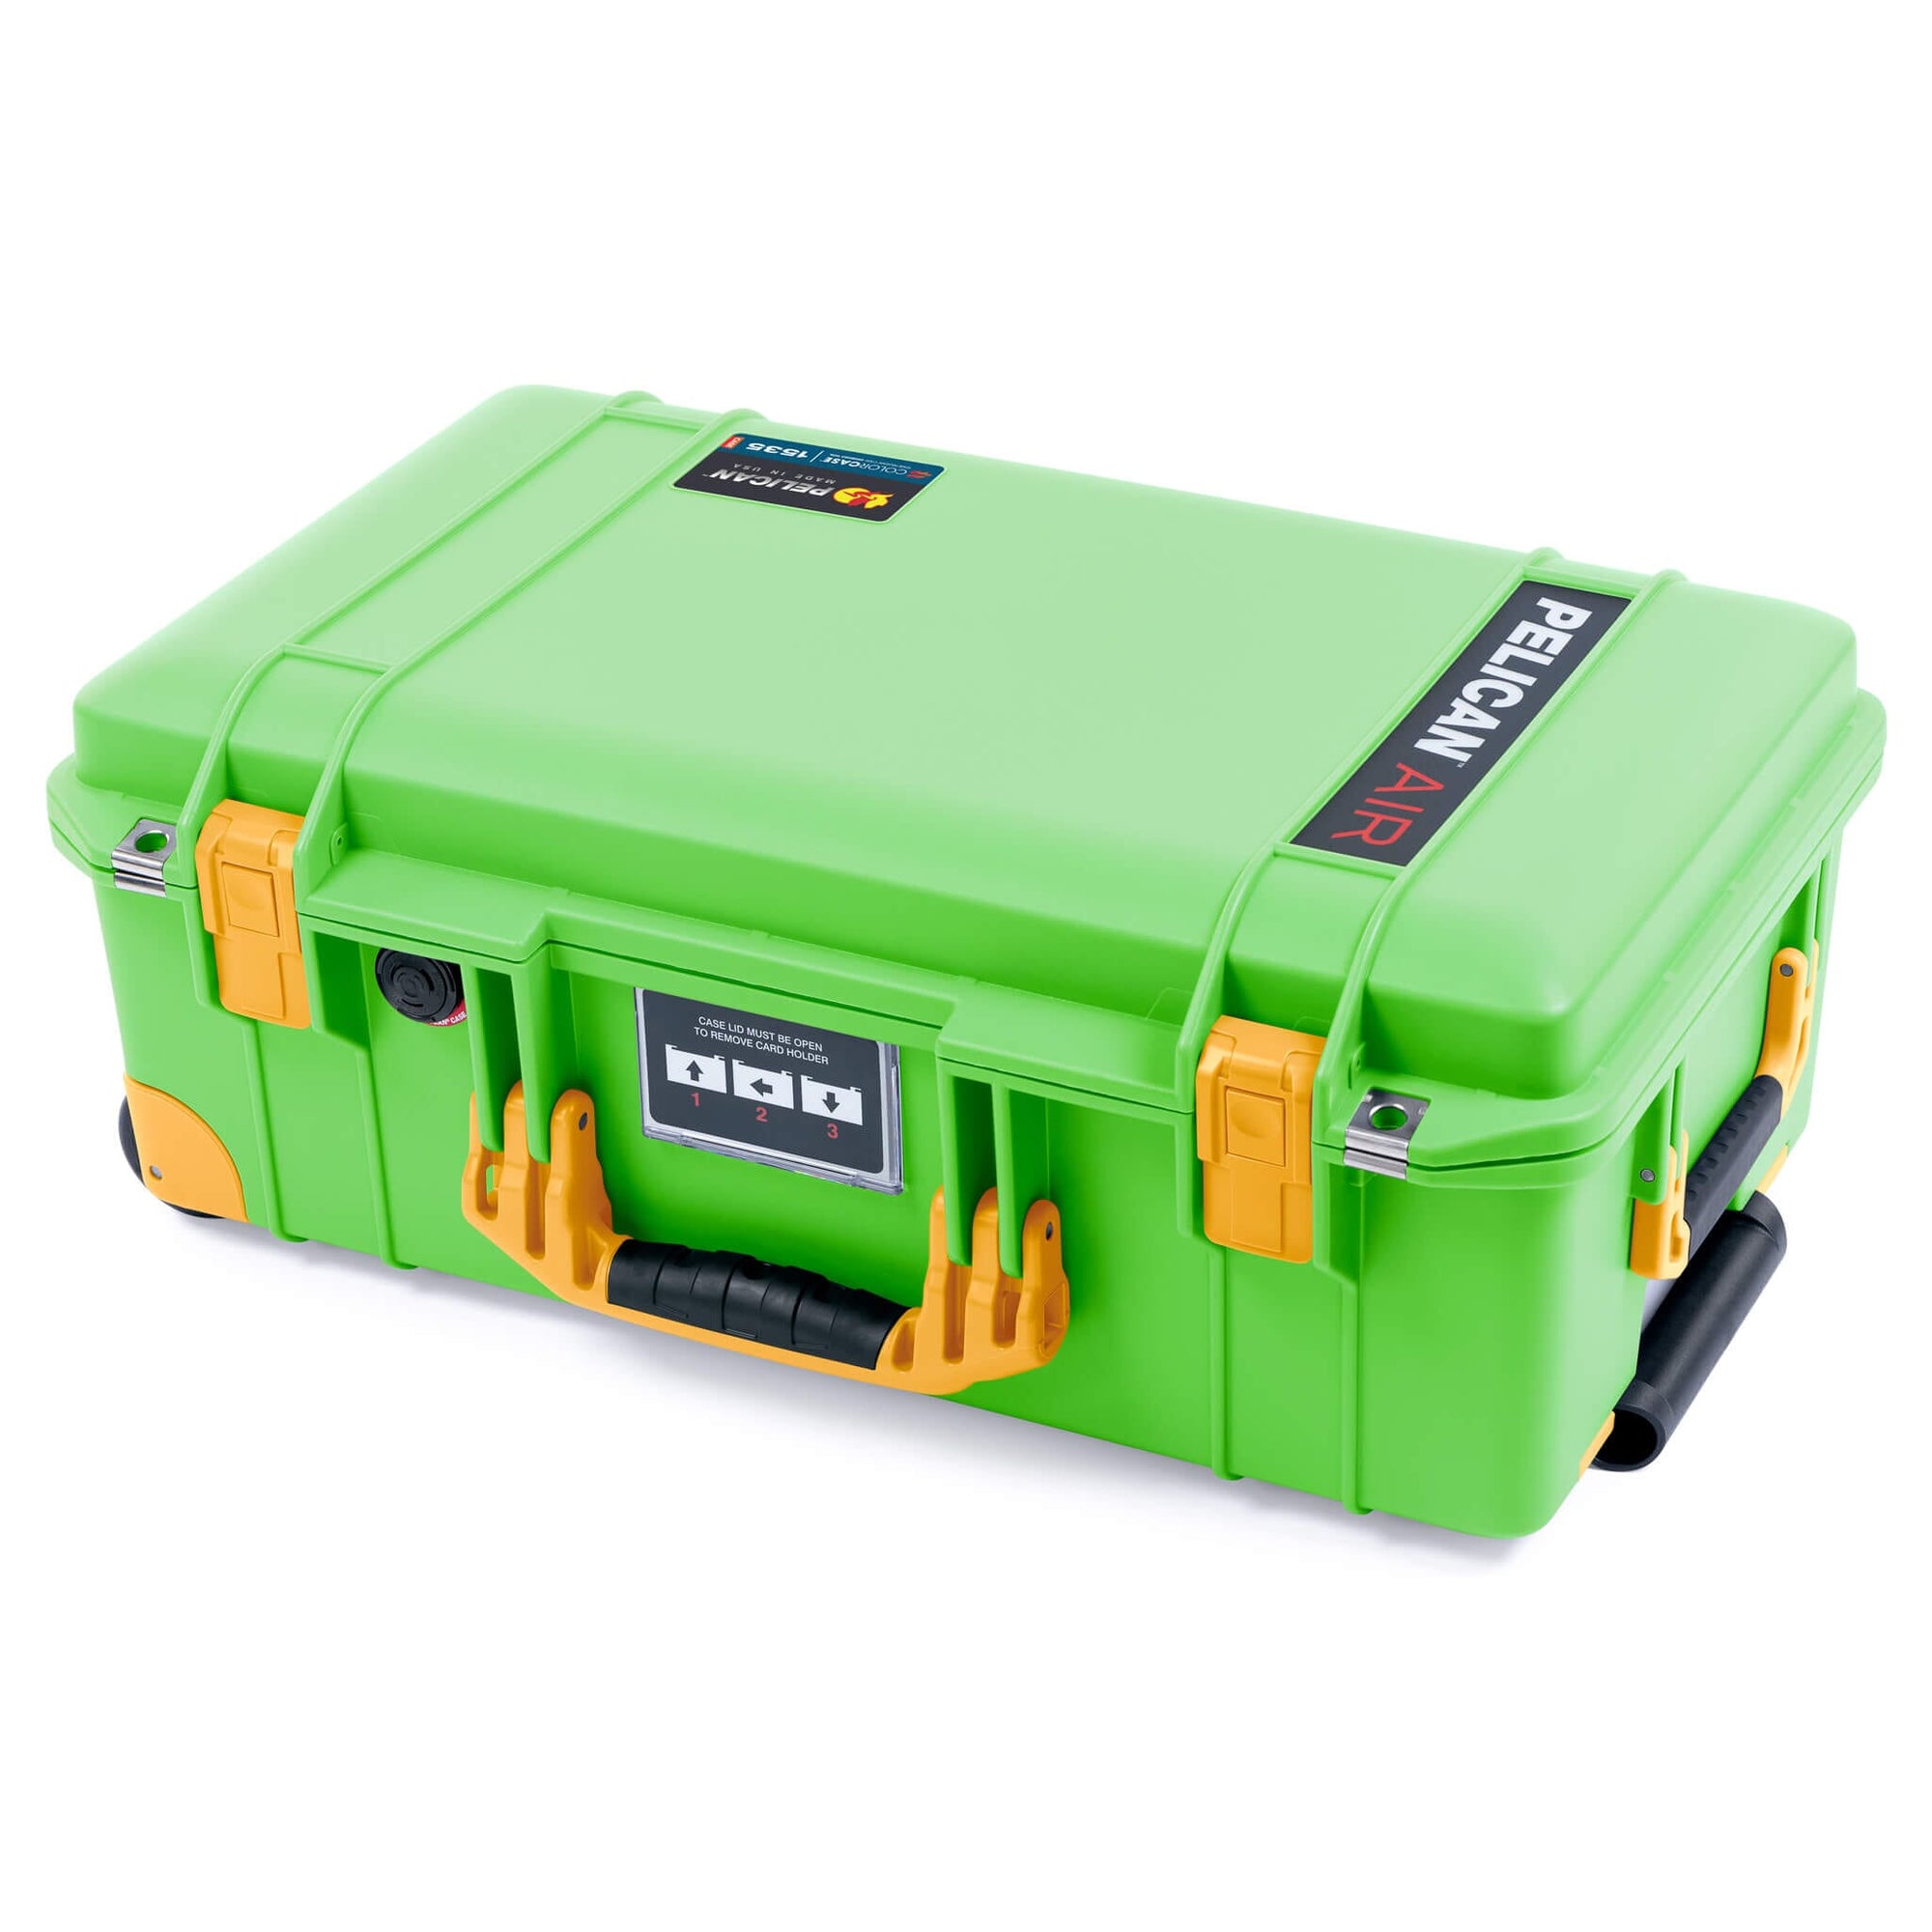 Pelican 1535 Air Case, Lime Green with Yellow Handles, Push-Button Latches & Trolley ColorCase 